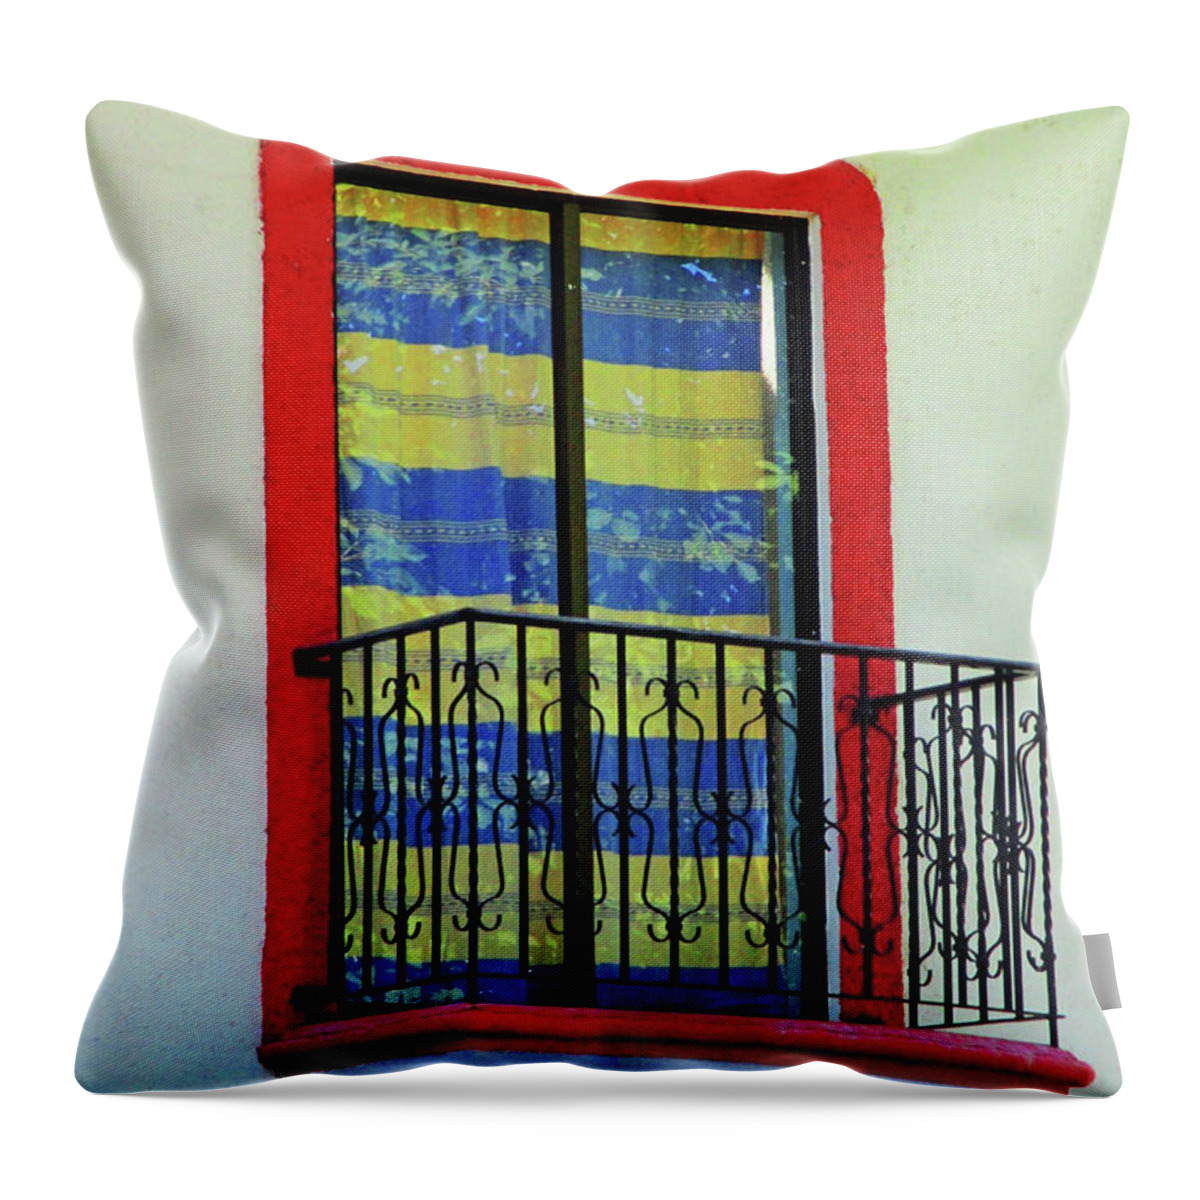 Huatulco Throw Pillow featuring the photograph Huatulco Window 3 by Randall Weidner